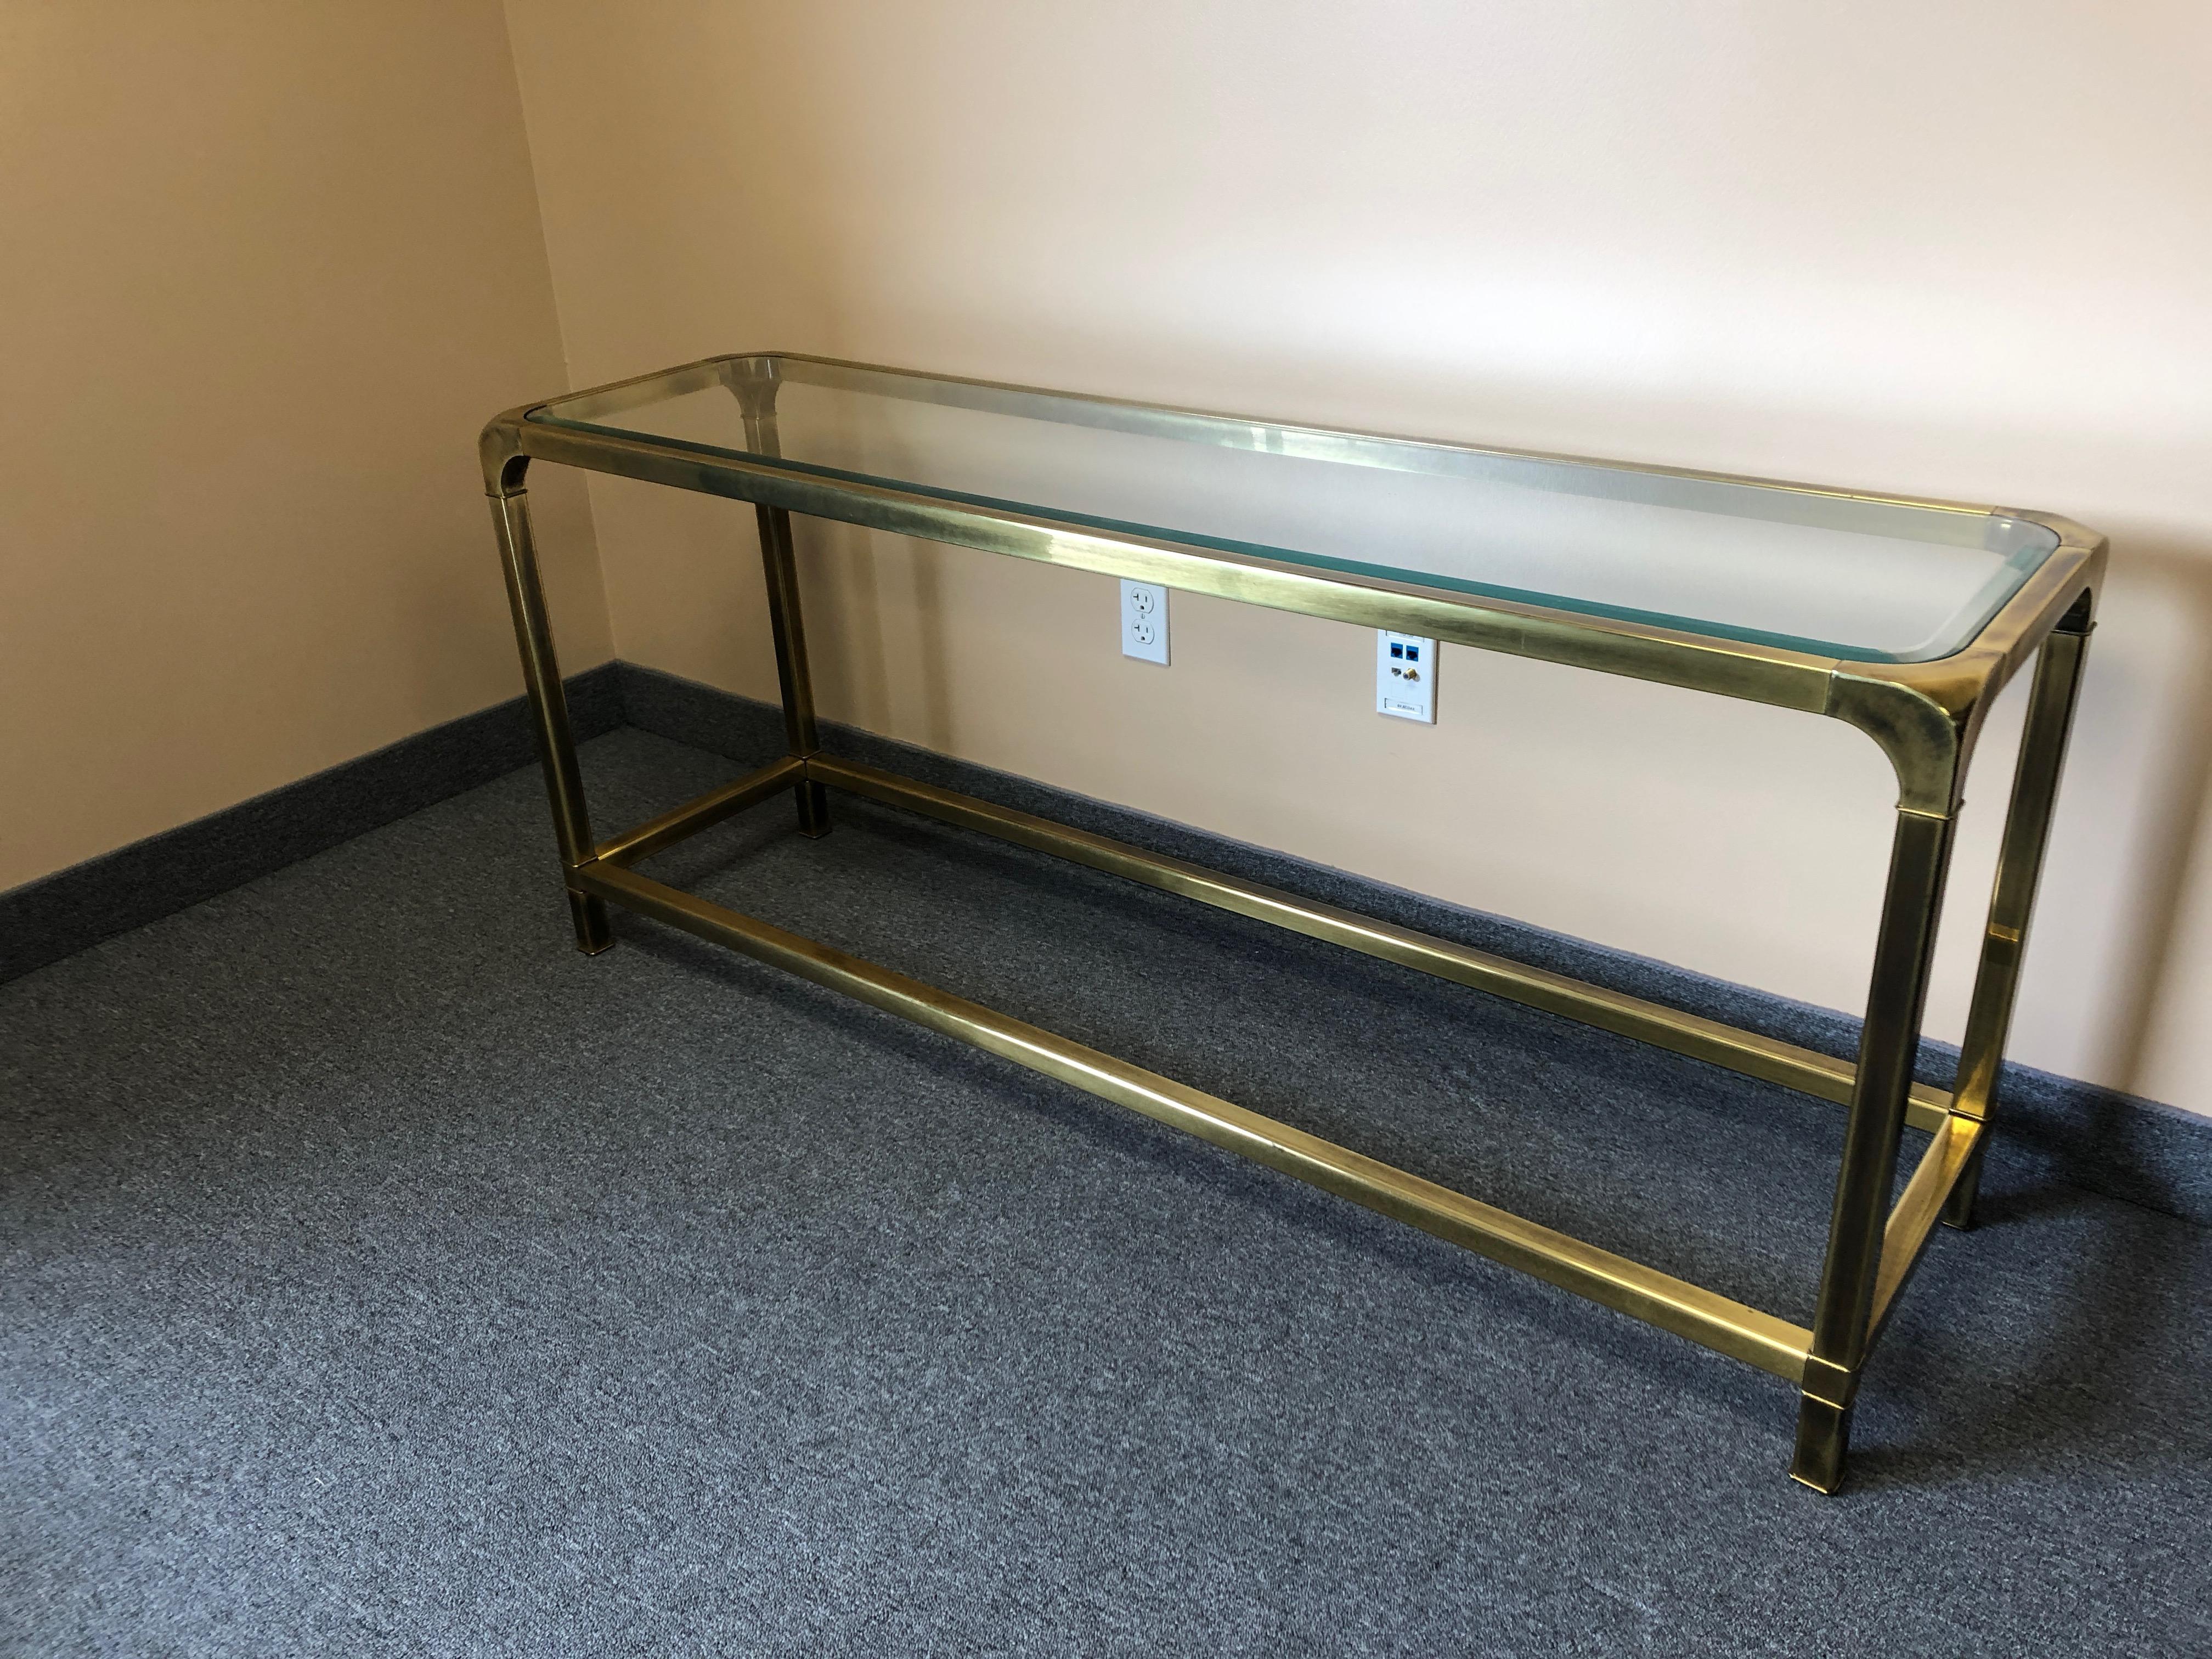 A chic sleek brass and glass console table by Mastercraft that's 26 inches high, perfect for behind a sofa or as a slightly low slung console anywhere.